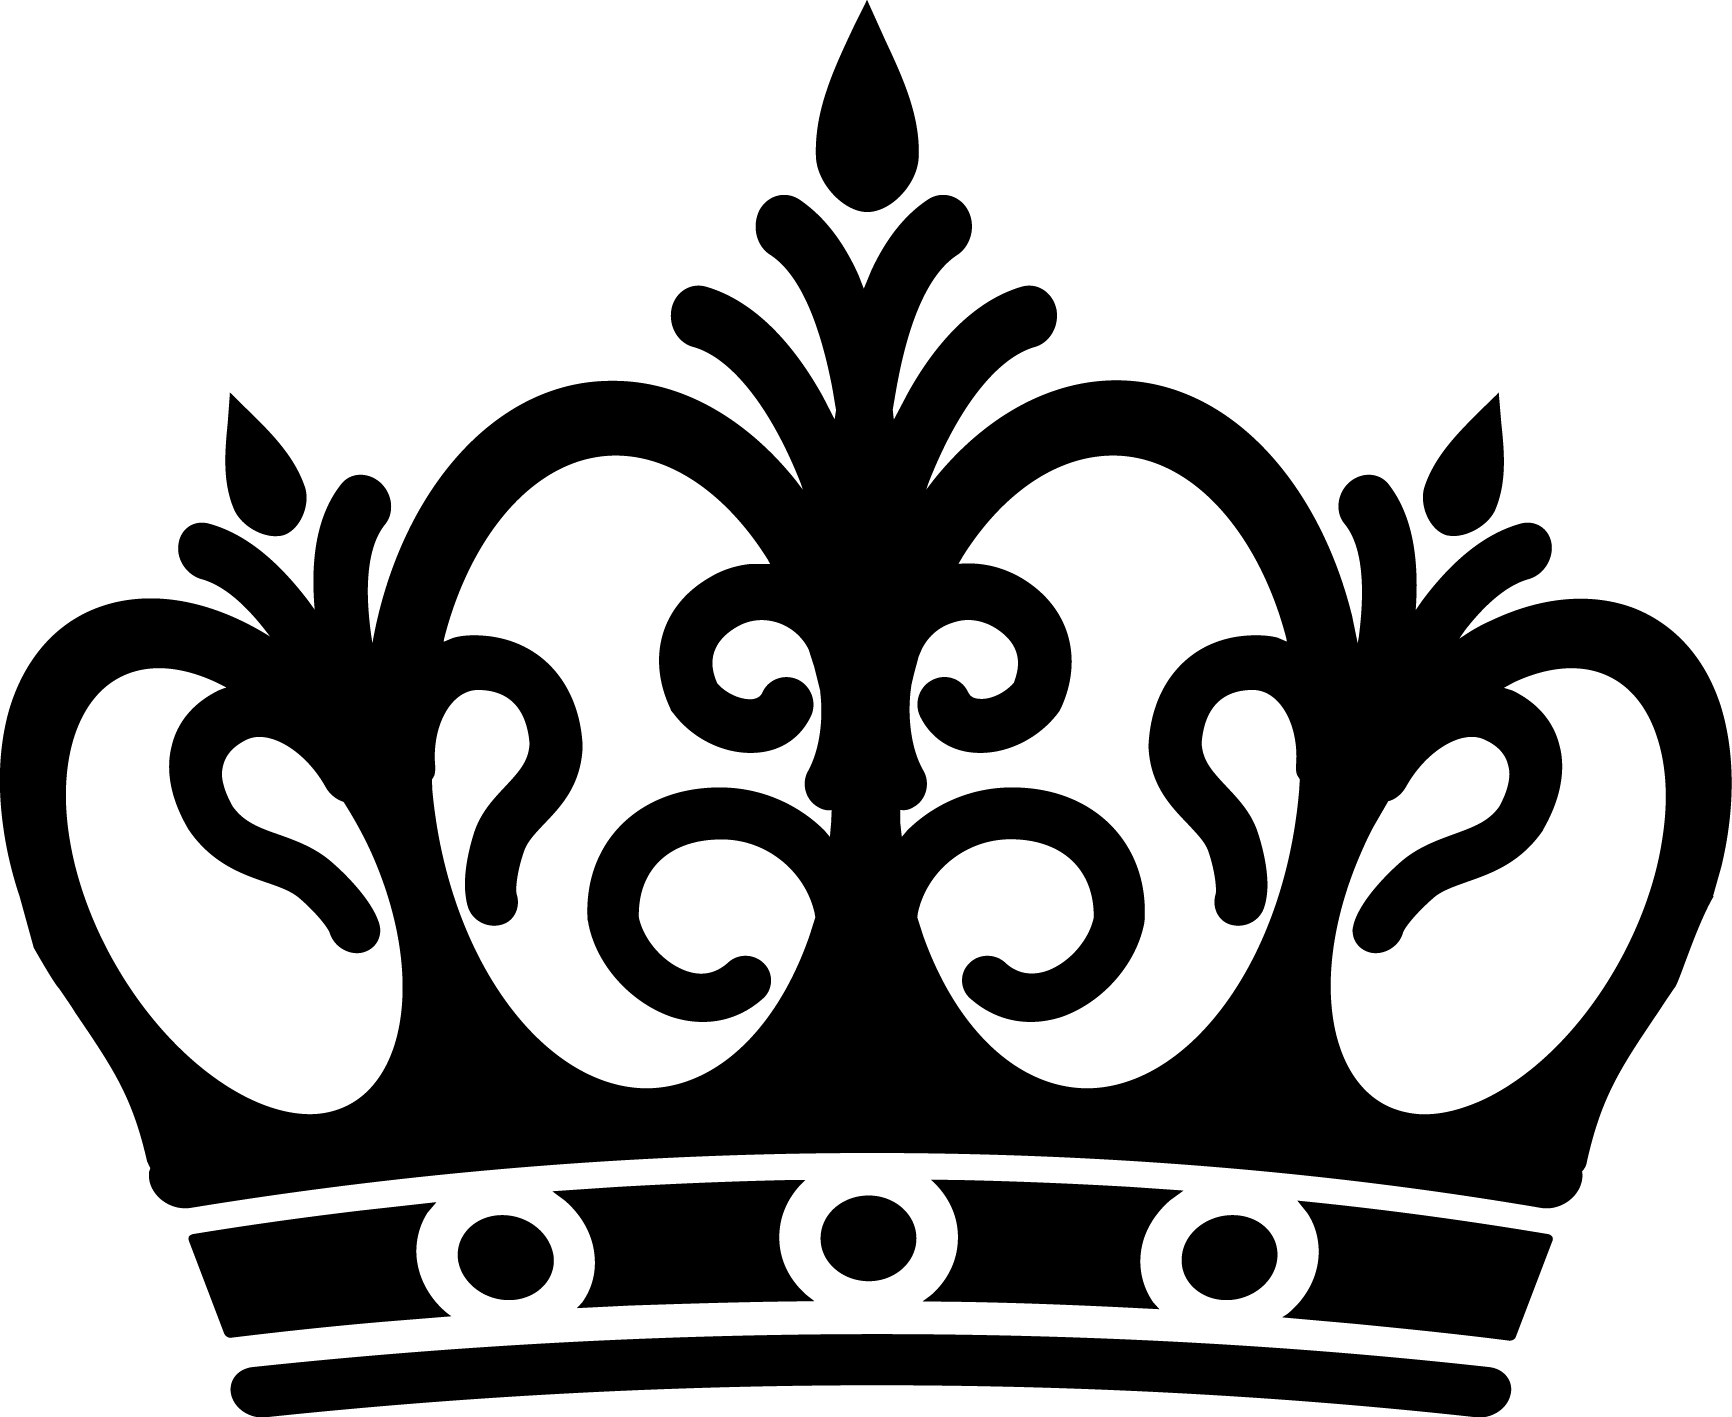 Black and White Crown Logo - Cute crown picture free black and white - RR collections